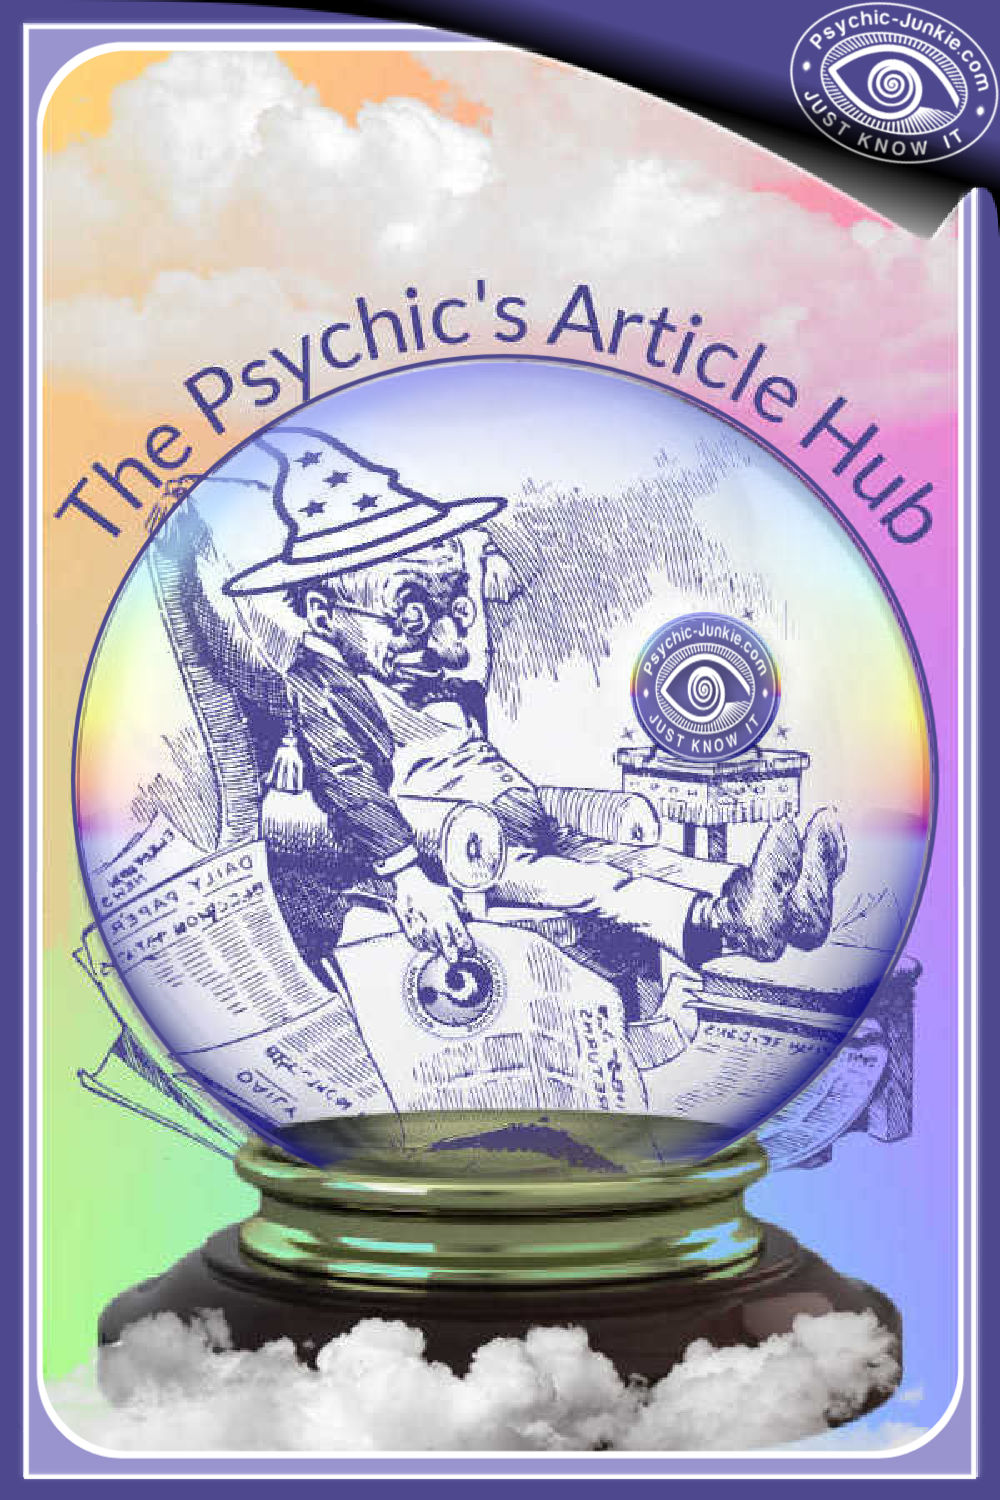 The Psychic's Article Hub